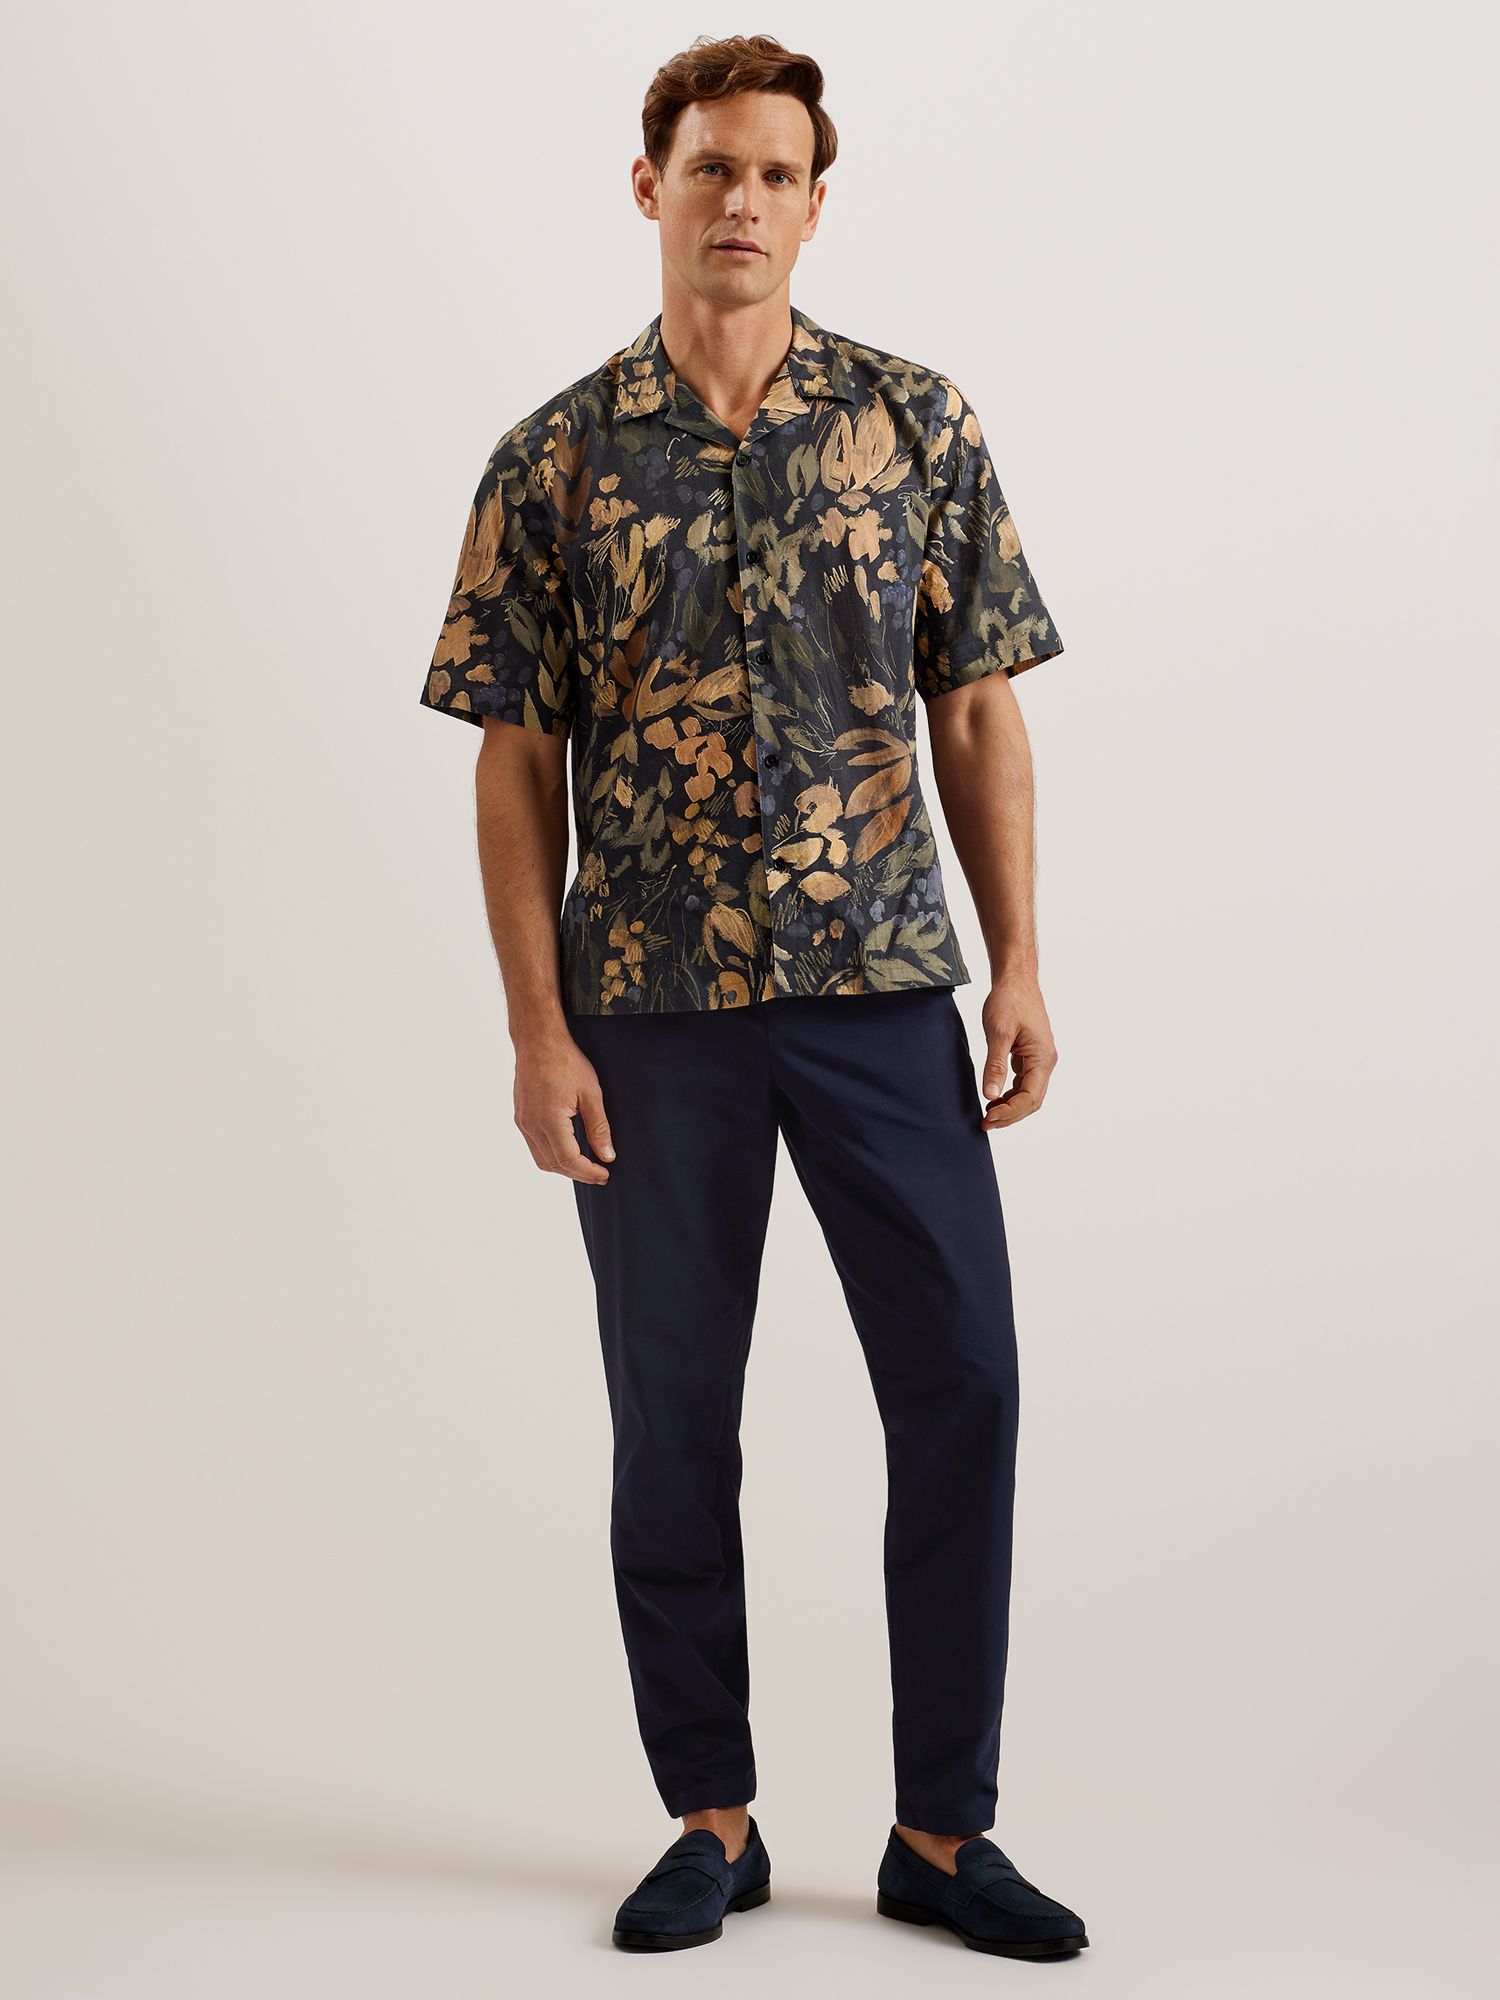 Buy Ted Baker Holmer Linen Blend Chino Trousers, Navy Online at johnlewis.com